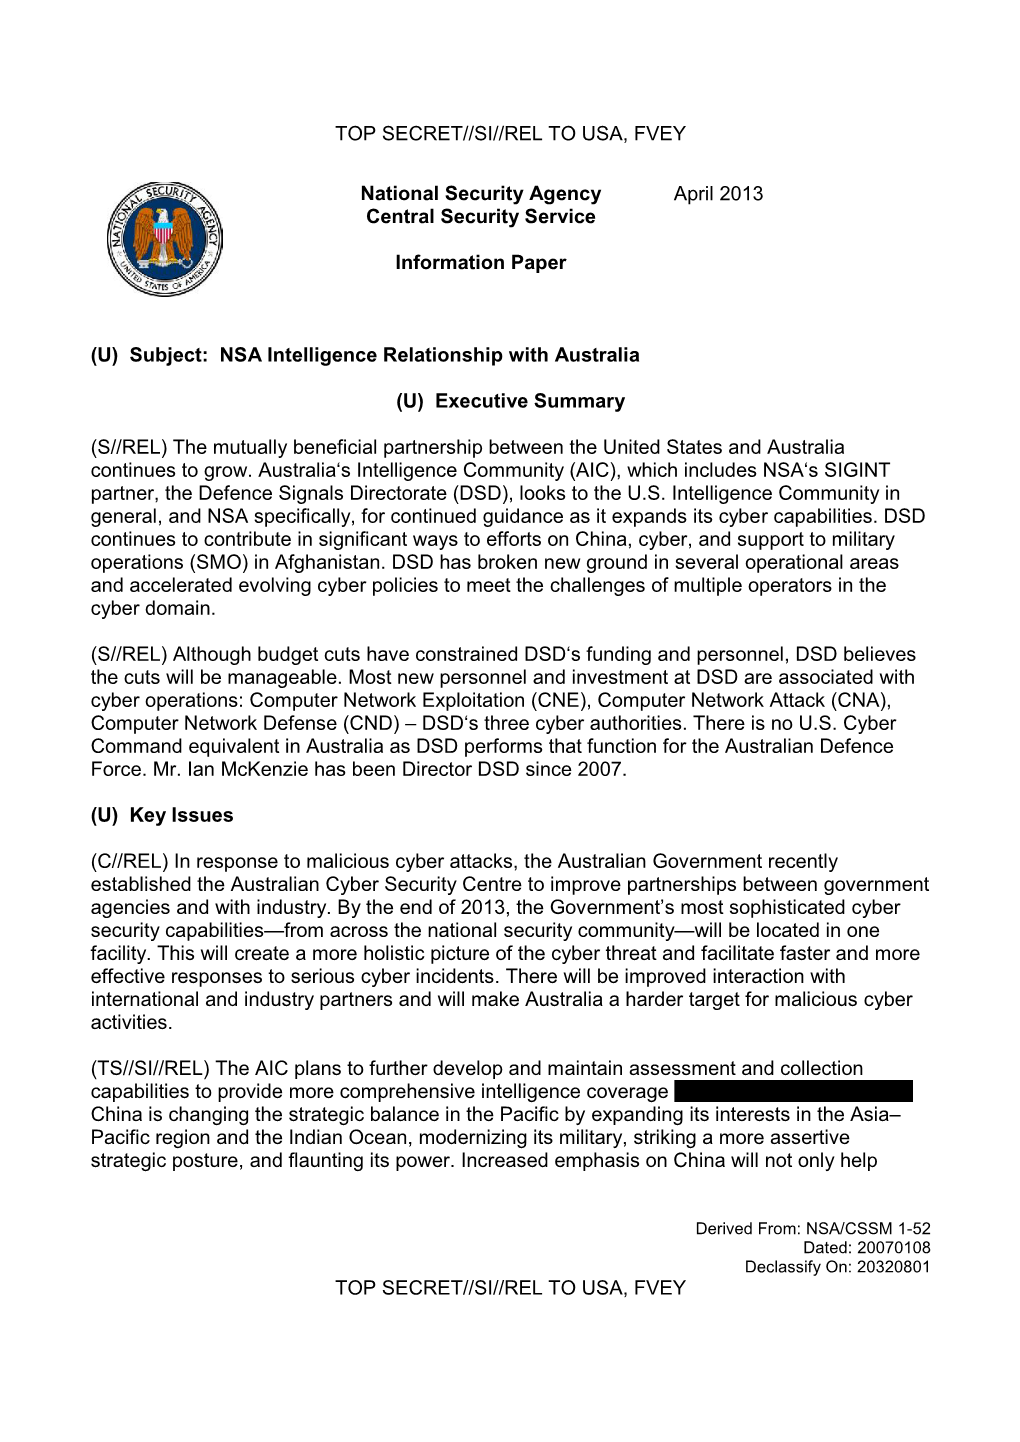 NSA Intelligence Relationship with Australia, Dated April 2013, A